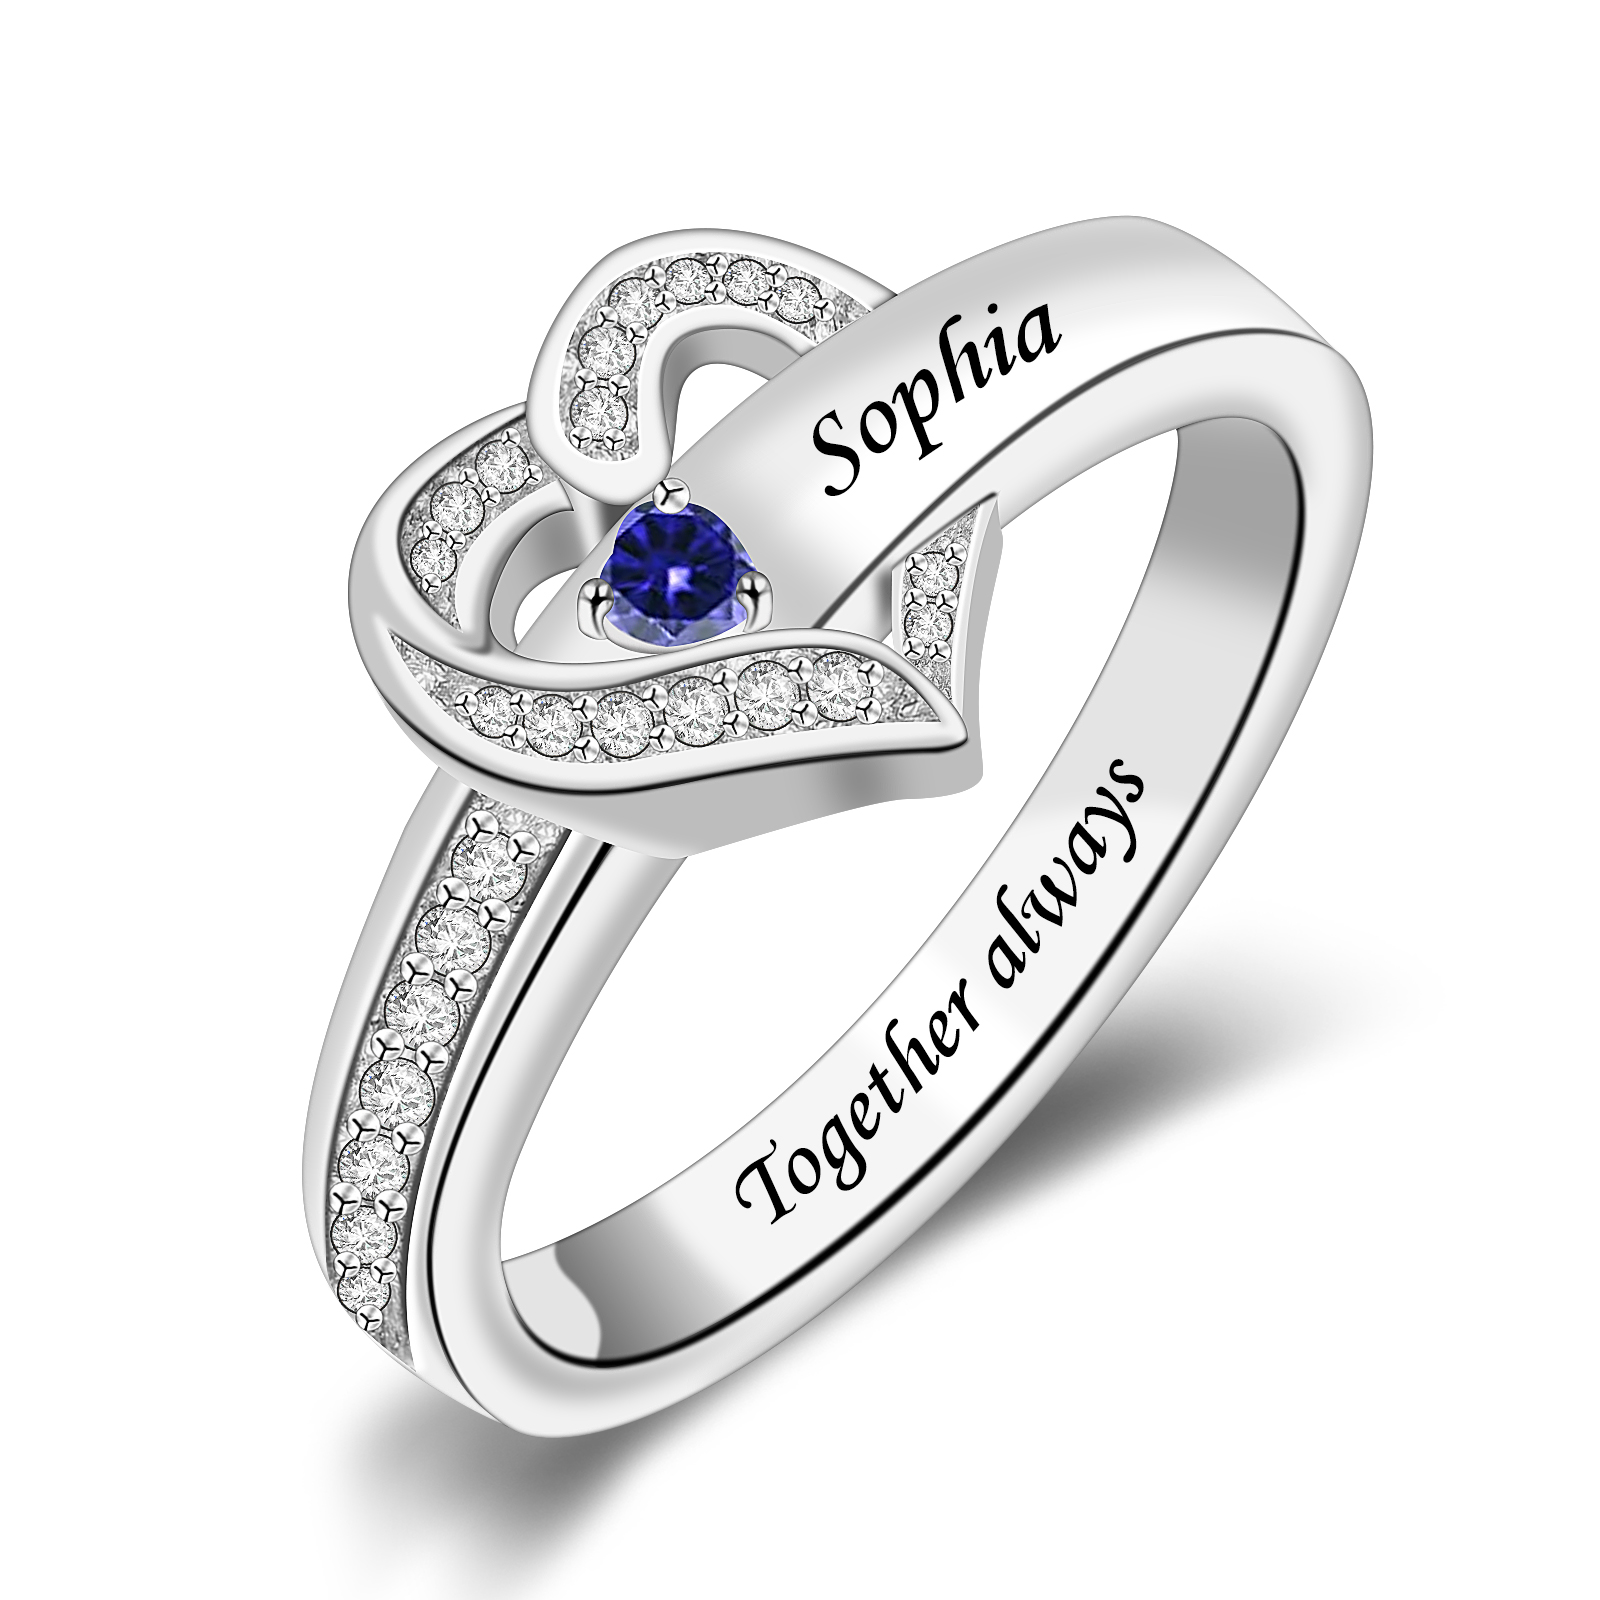 Personalized Heart Ring Series Birthstone Ring with Engraved Names-YITUB